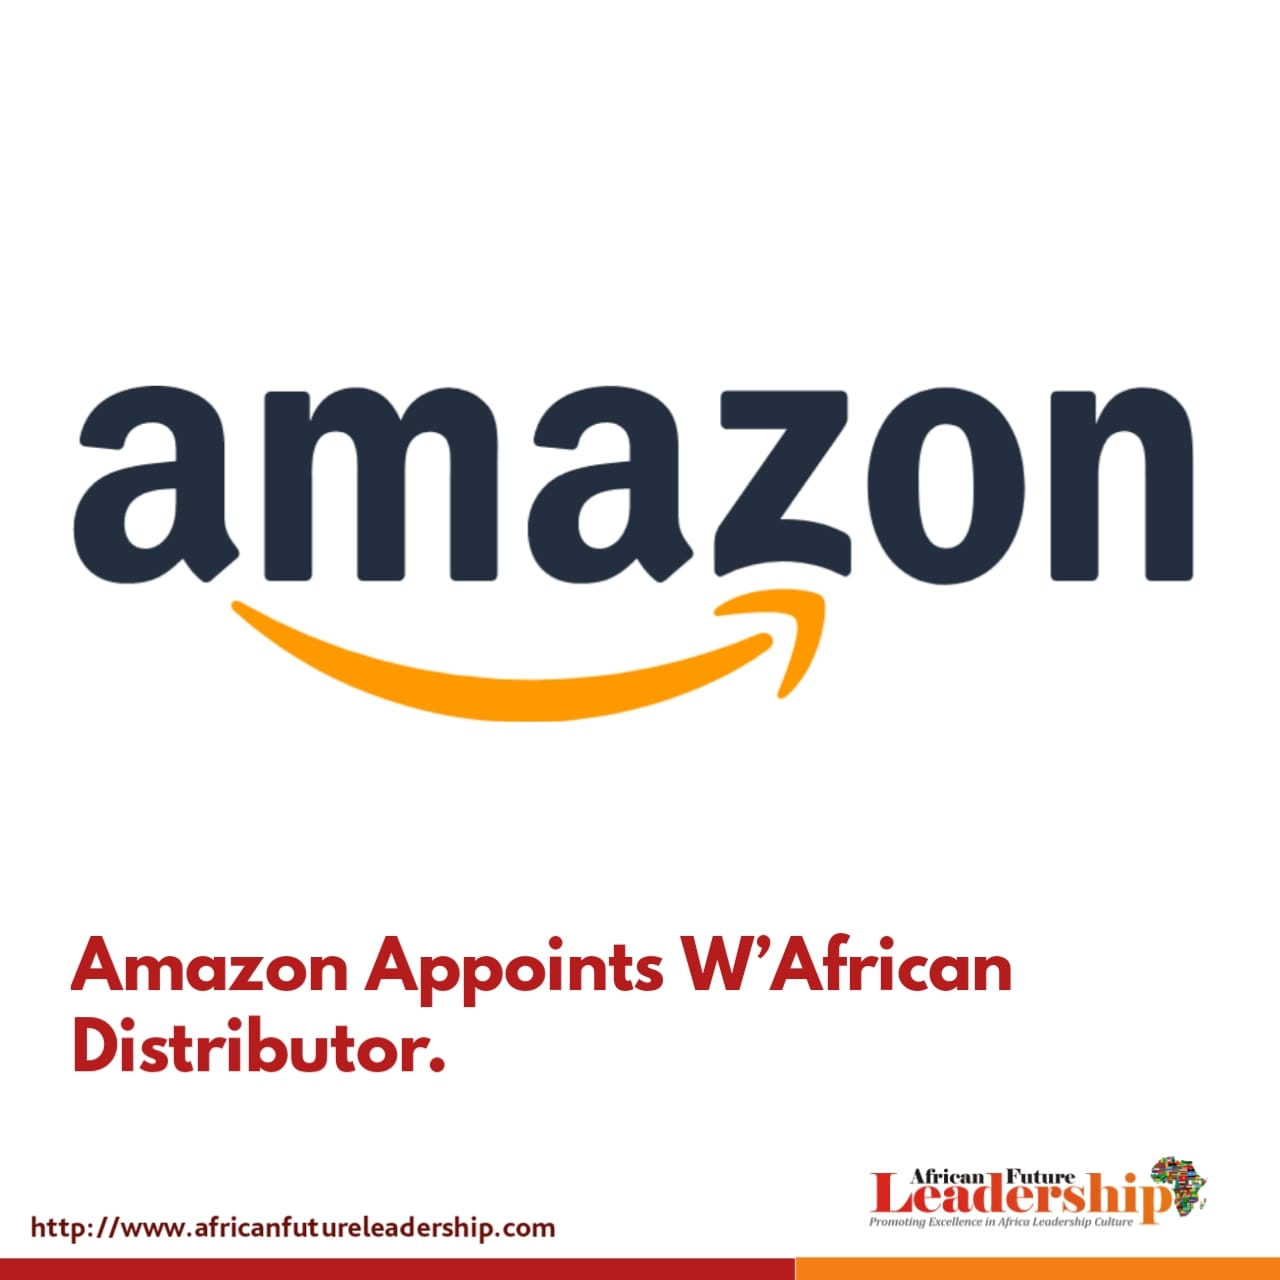 Amazon Appoints W’African Distributor